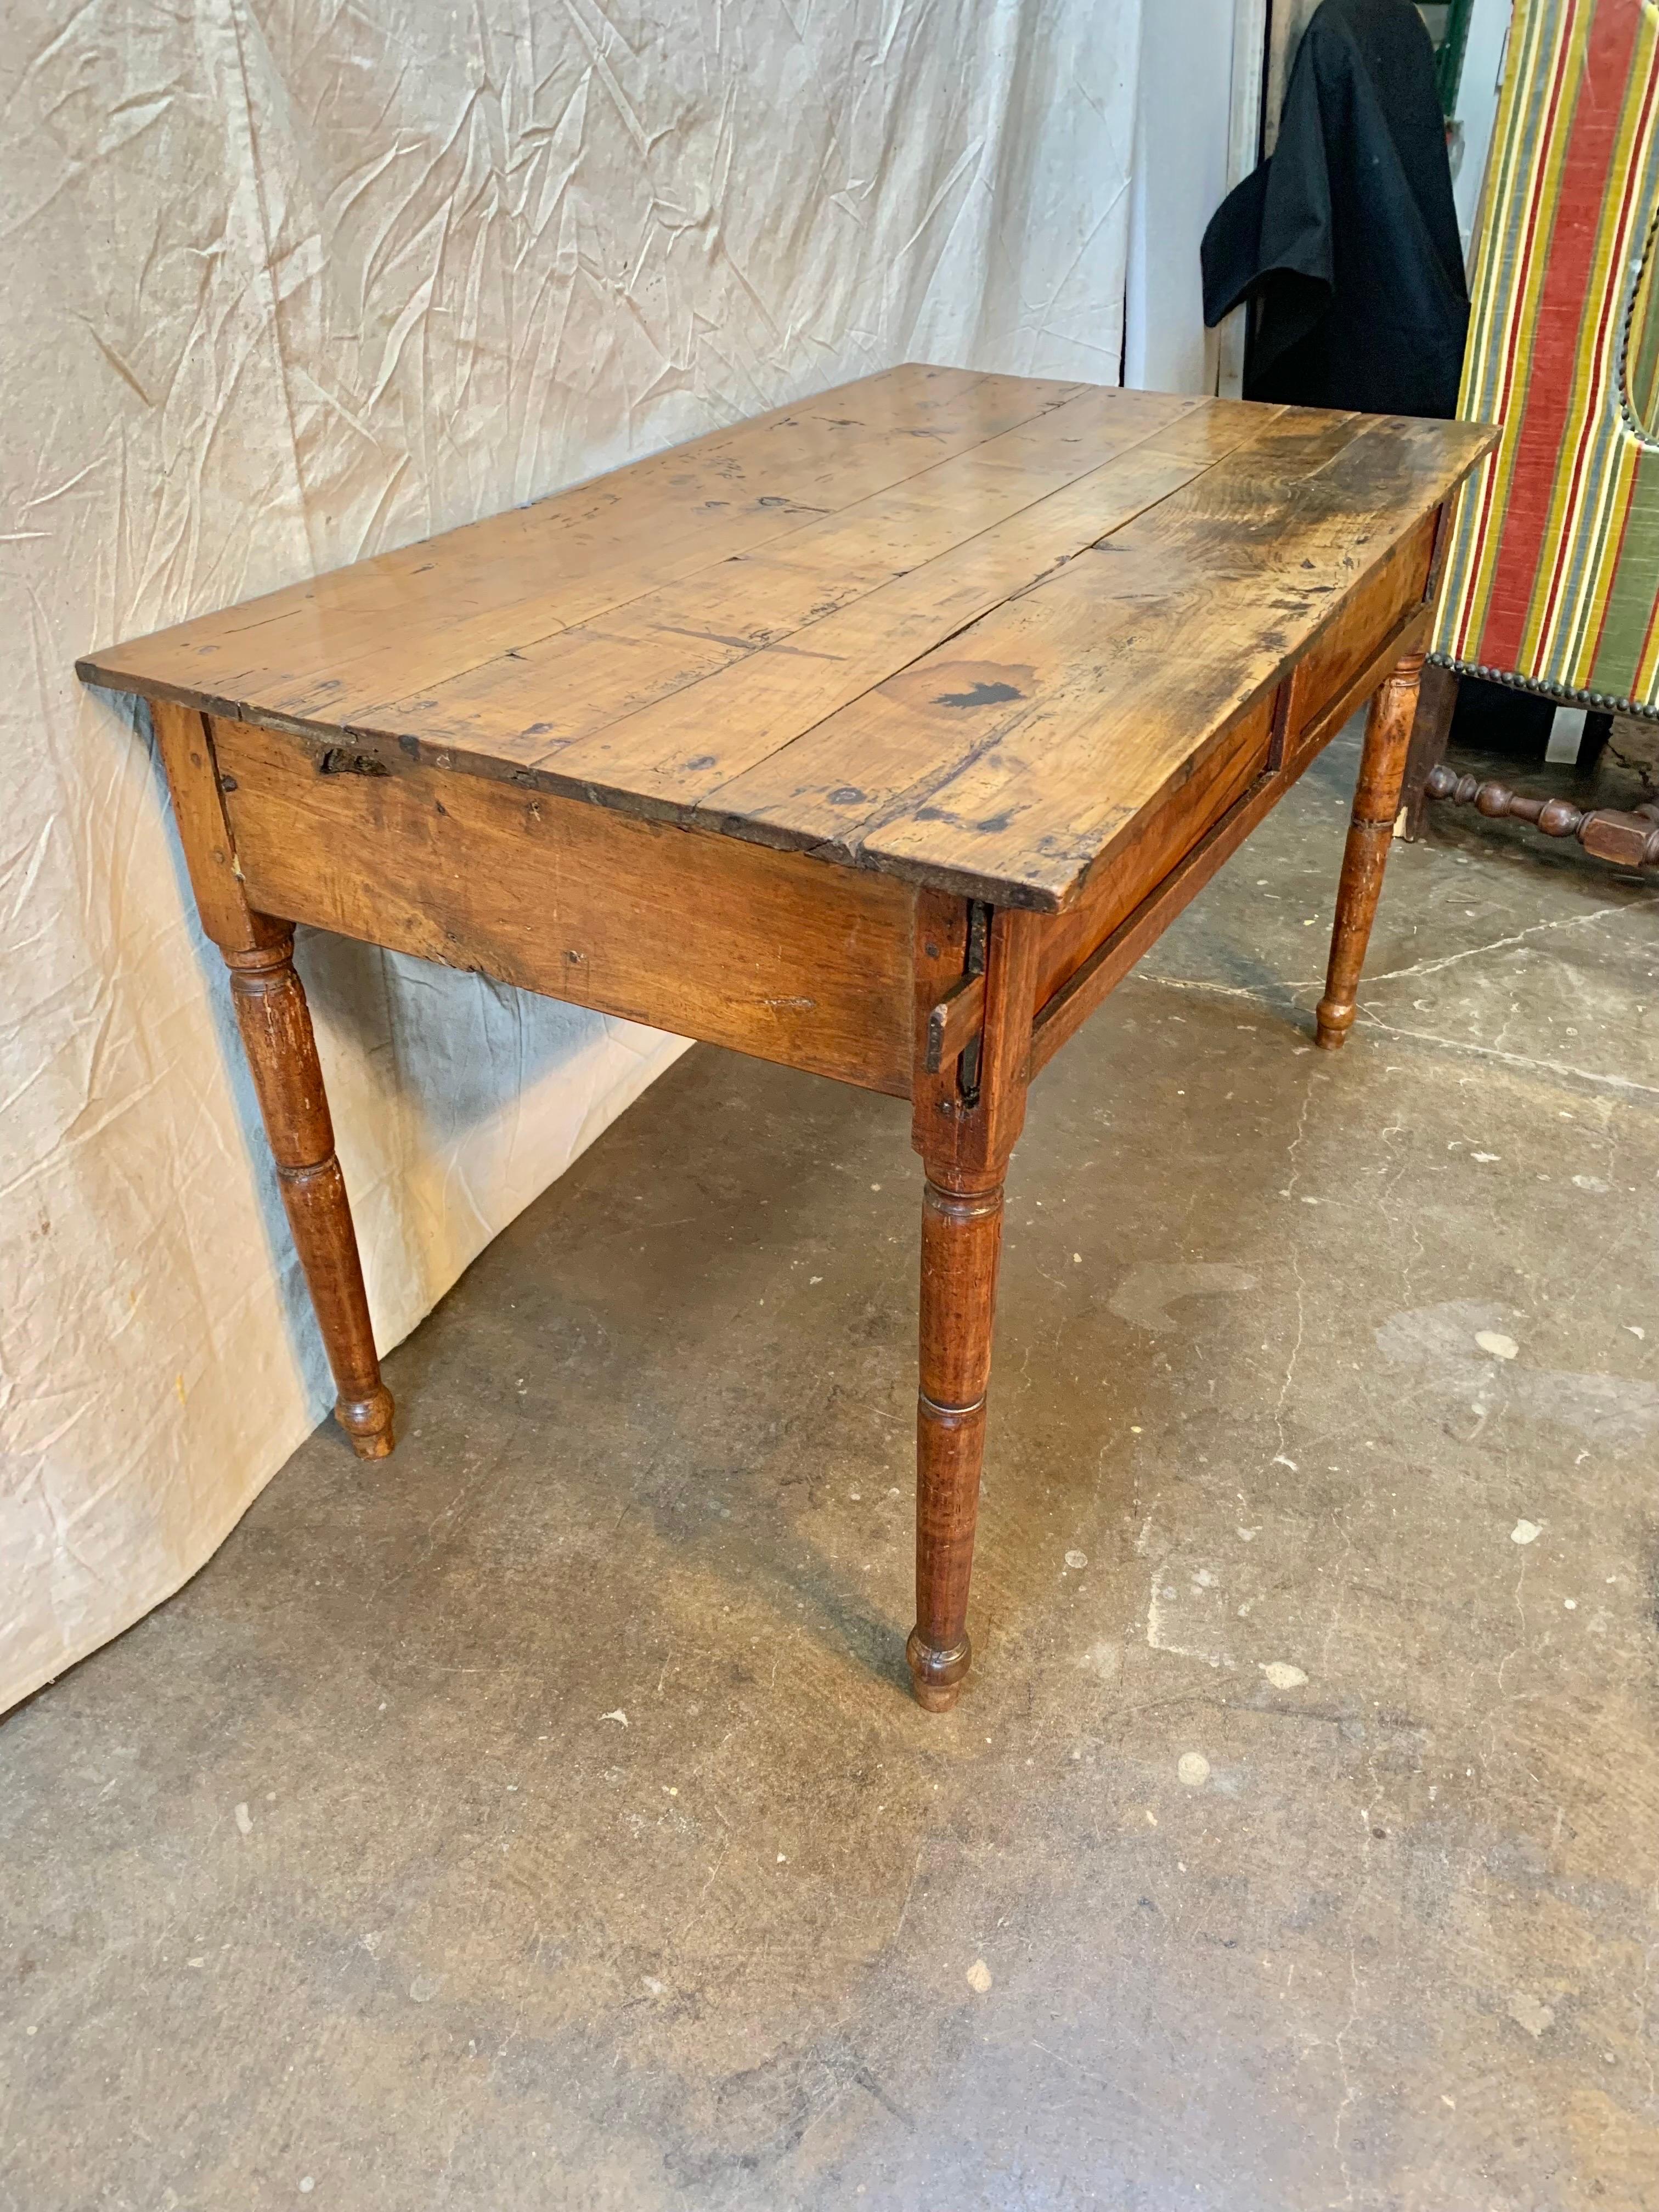 19th Century French Walnut Farm Table With Sliding Panels and Storage In Good Condition For Sale In Burton, TX